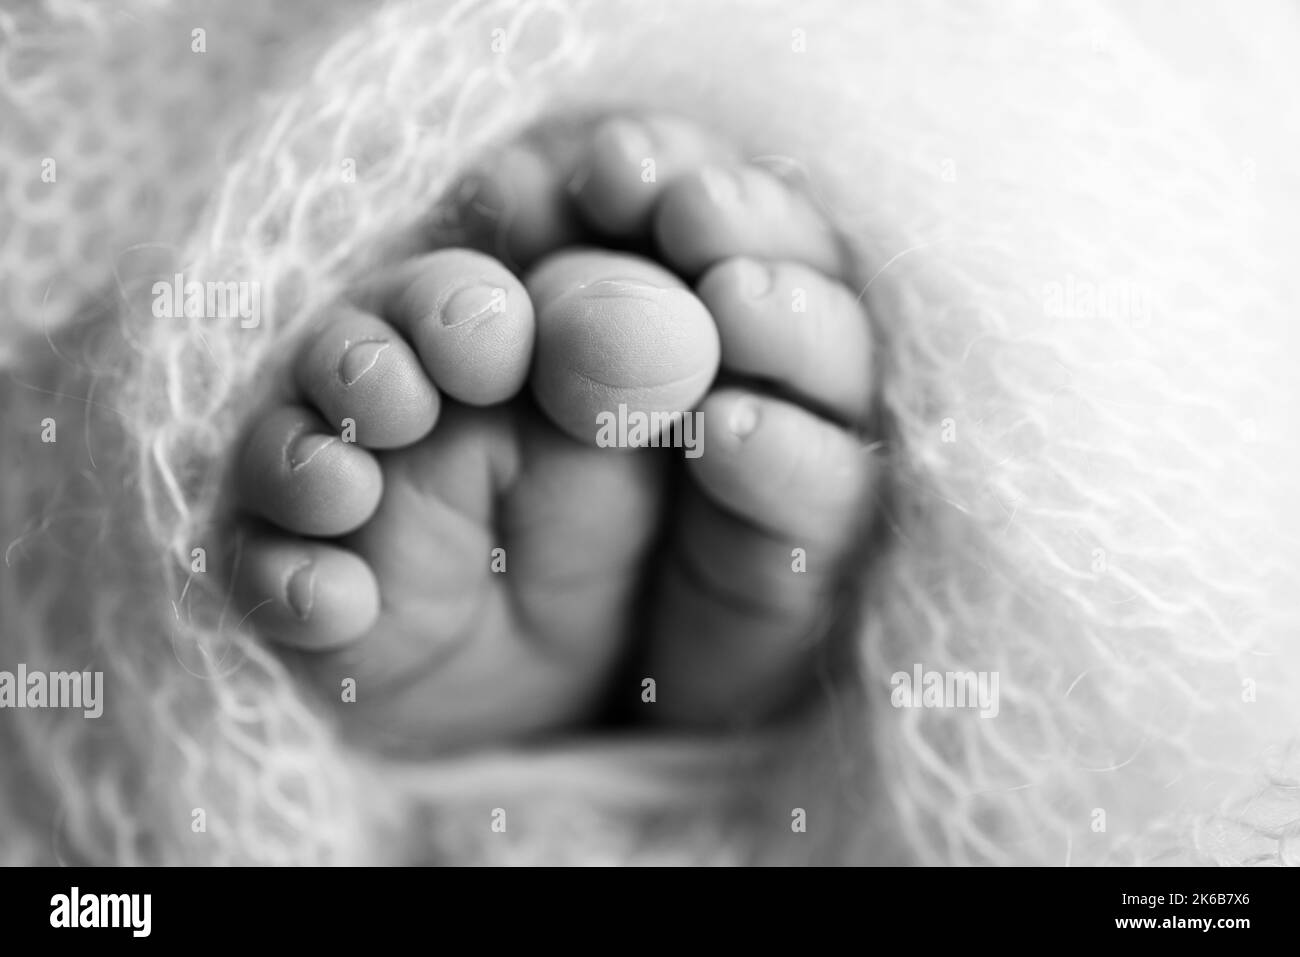 Soft feet of a newborn in a woolen blanket Close-up of toes, heels and feet of a baby.The tiny foot of a newborn. Stock Photo